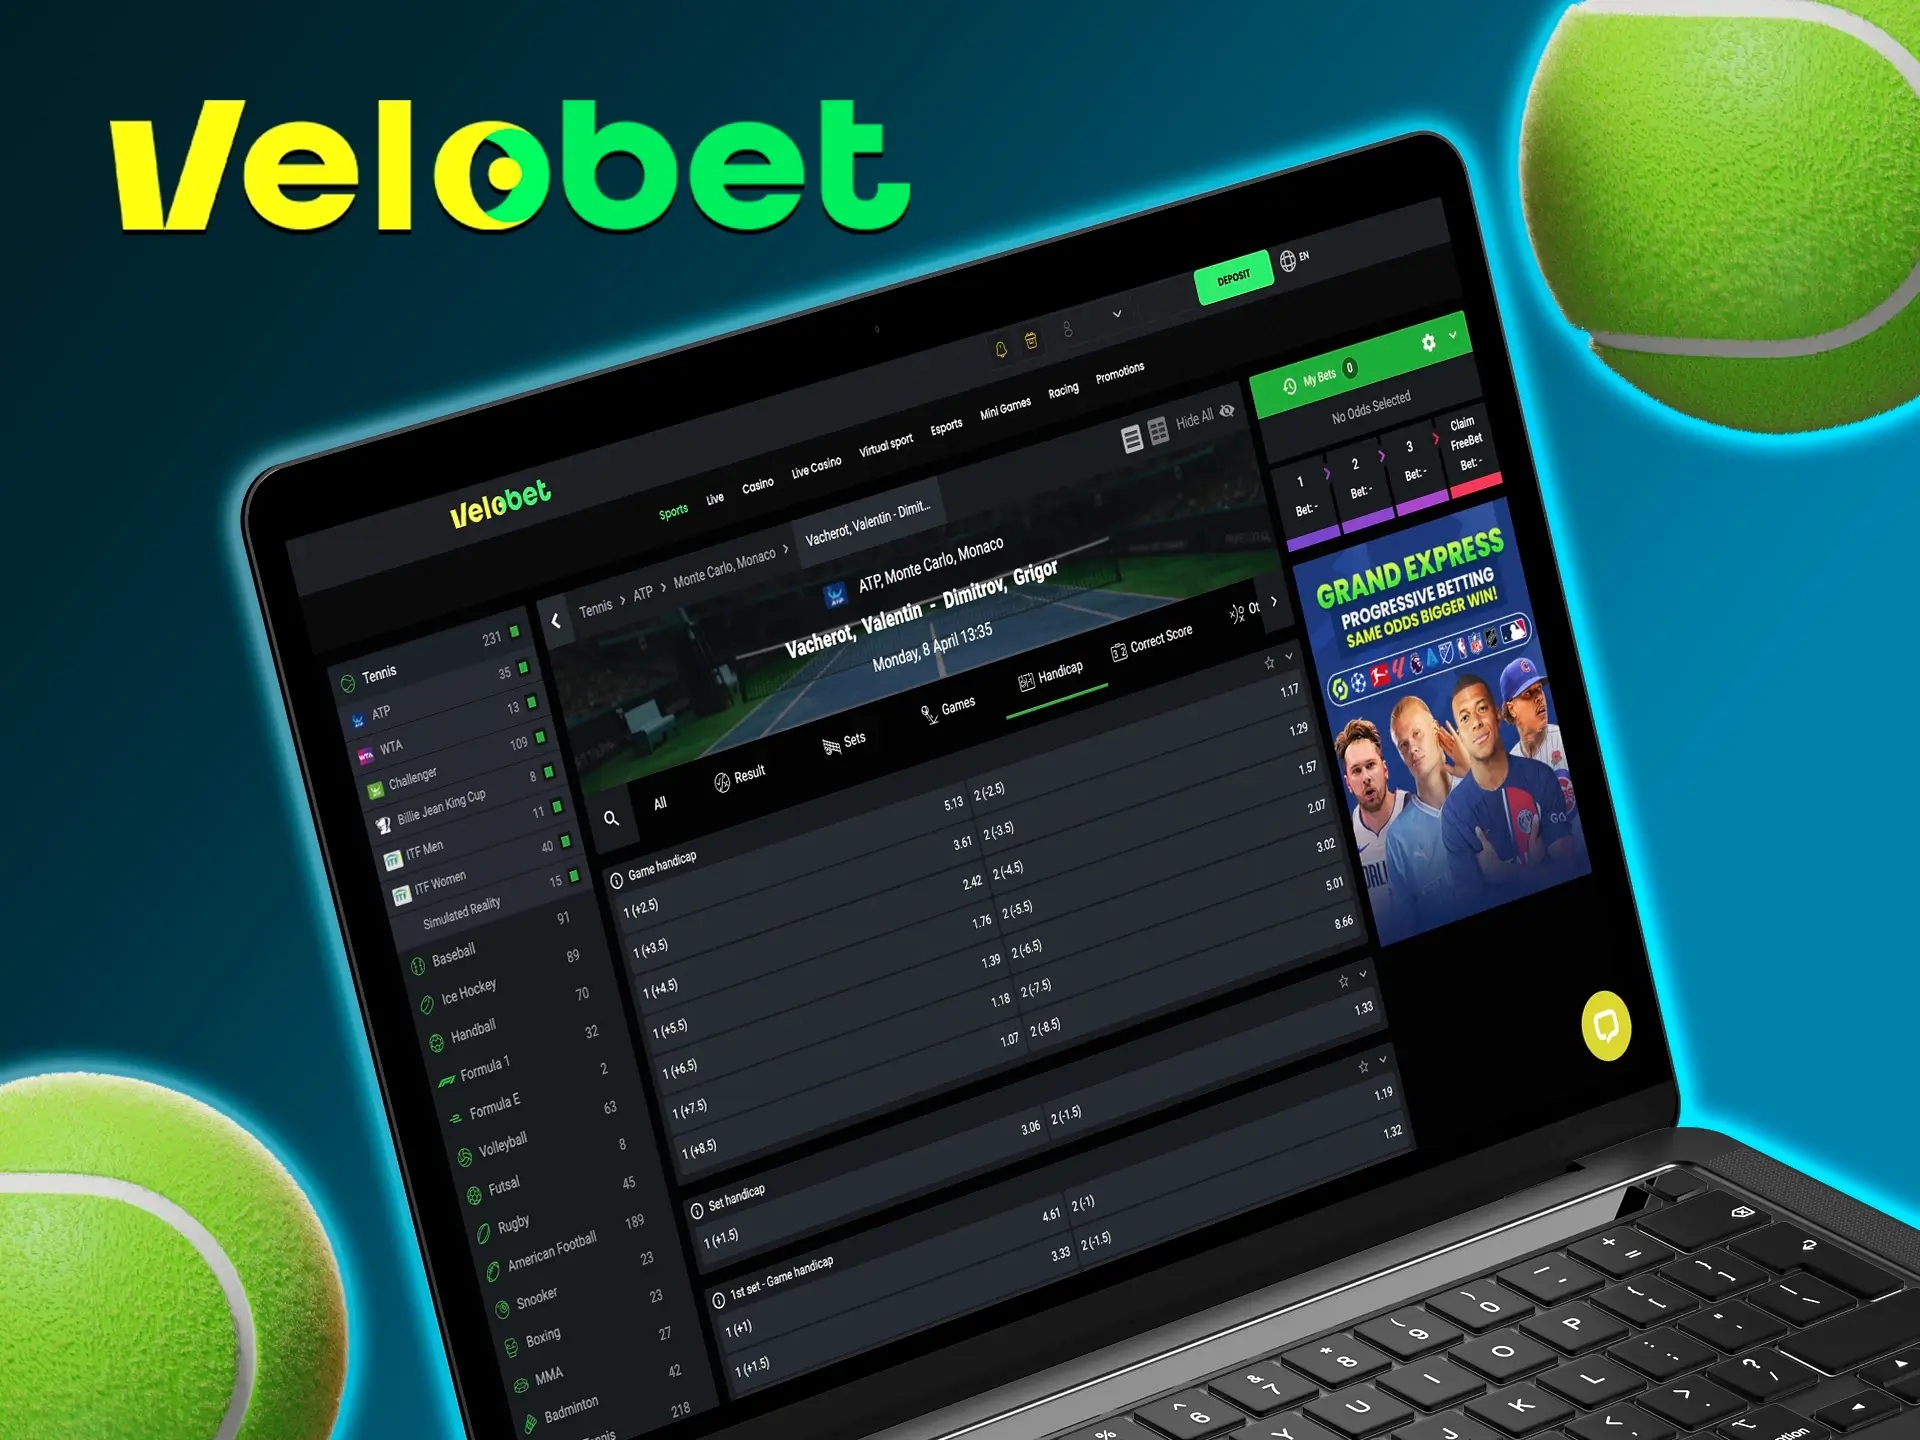 Make a correct prediction on the favourite in the match and pick up a big win at Velobet.